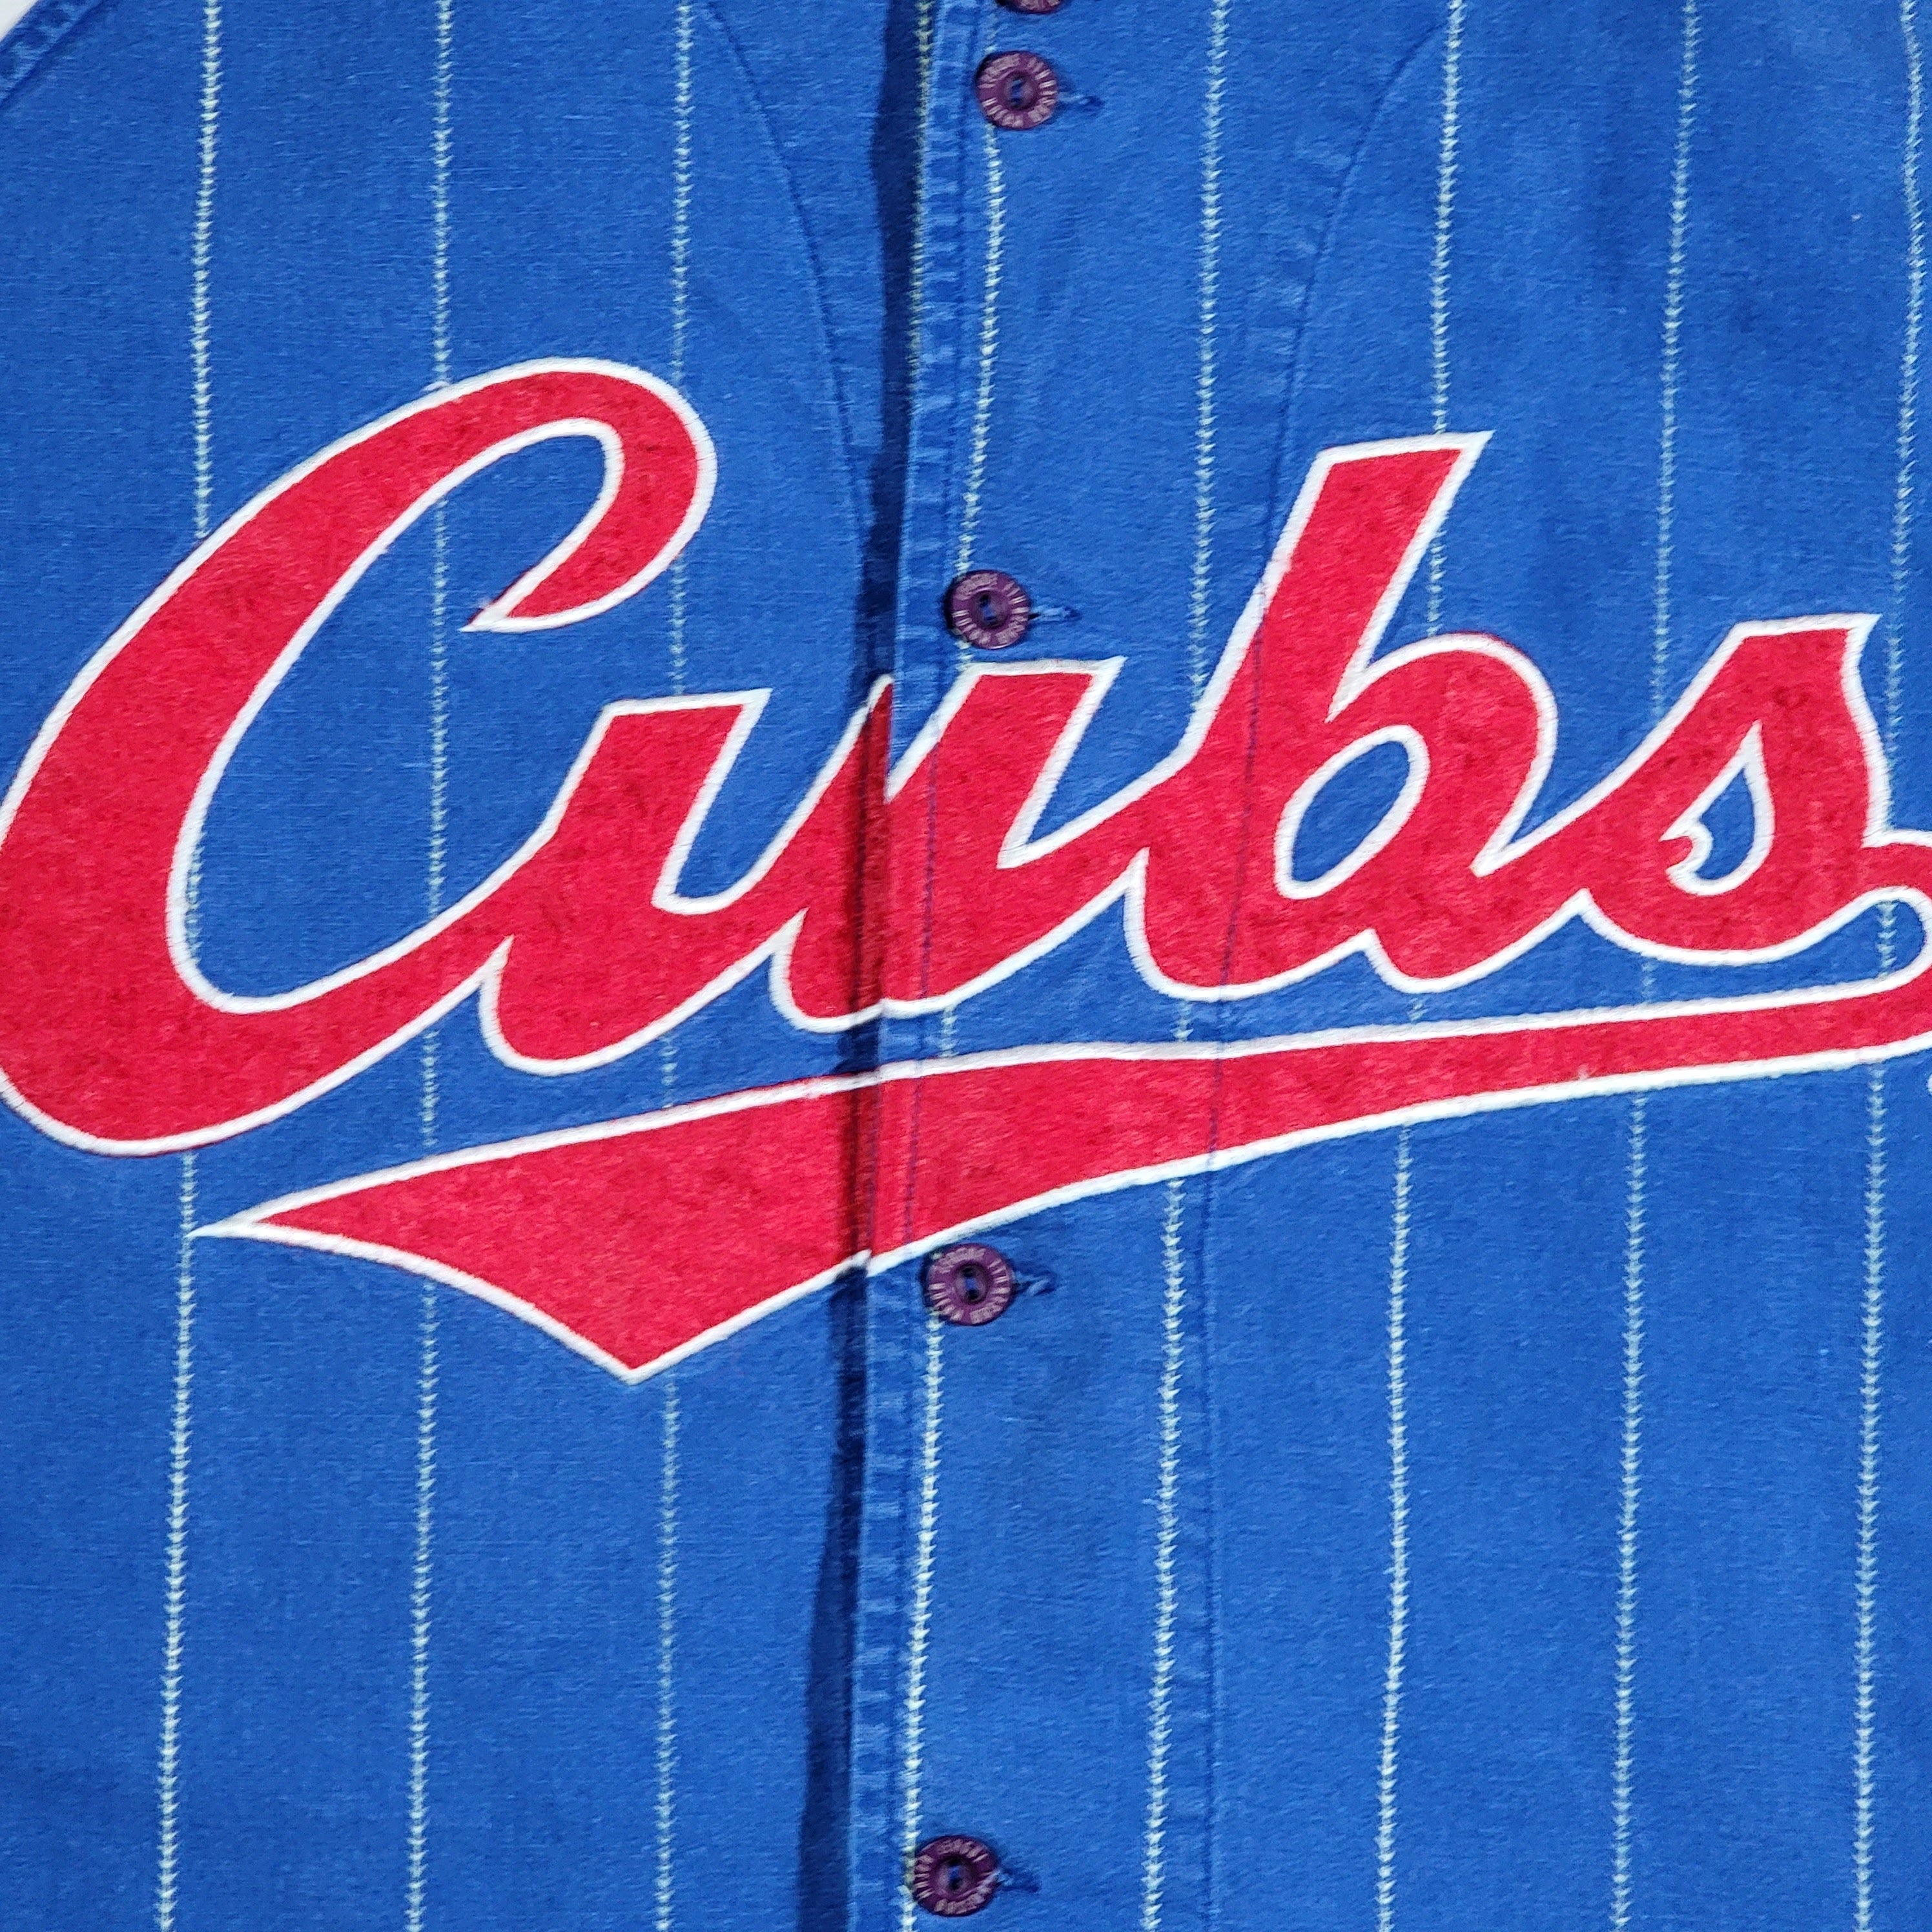 90s/00s Chicago Cubs Vintage Mirage Mlb Baseball Jersey By Mirage Coop